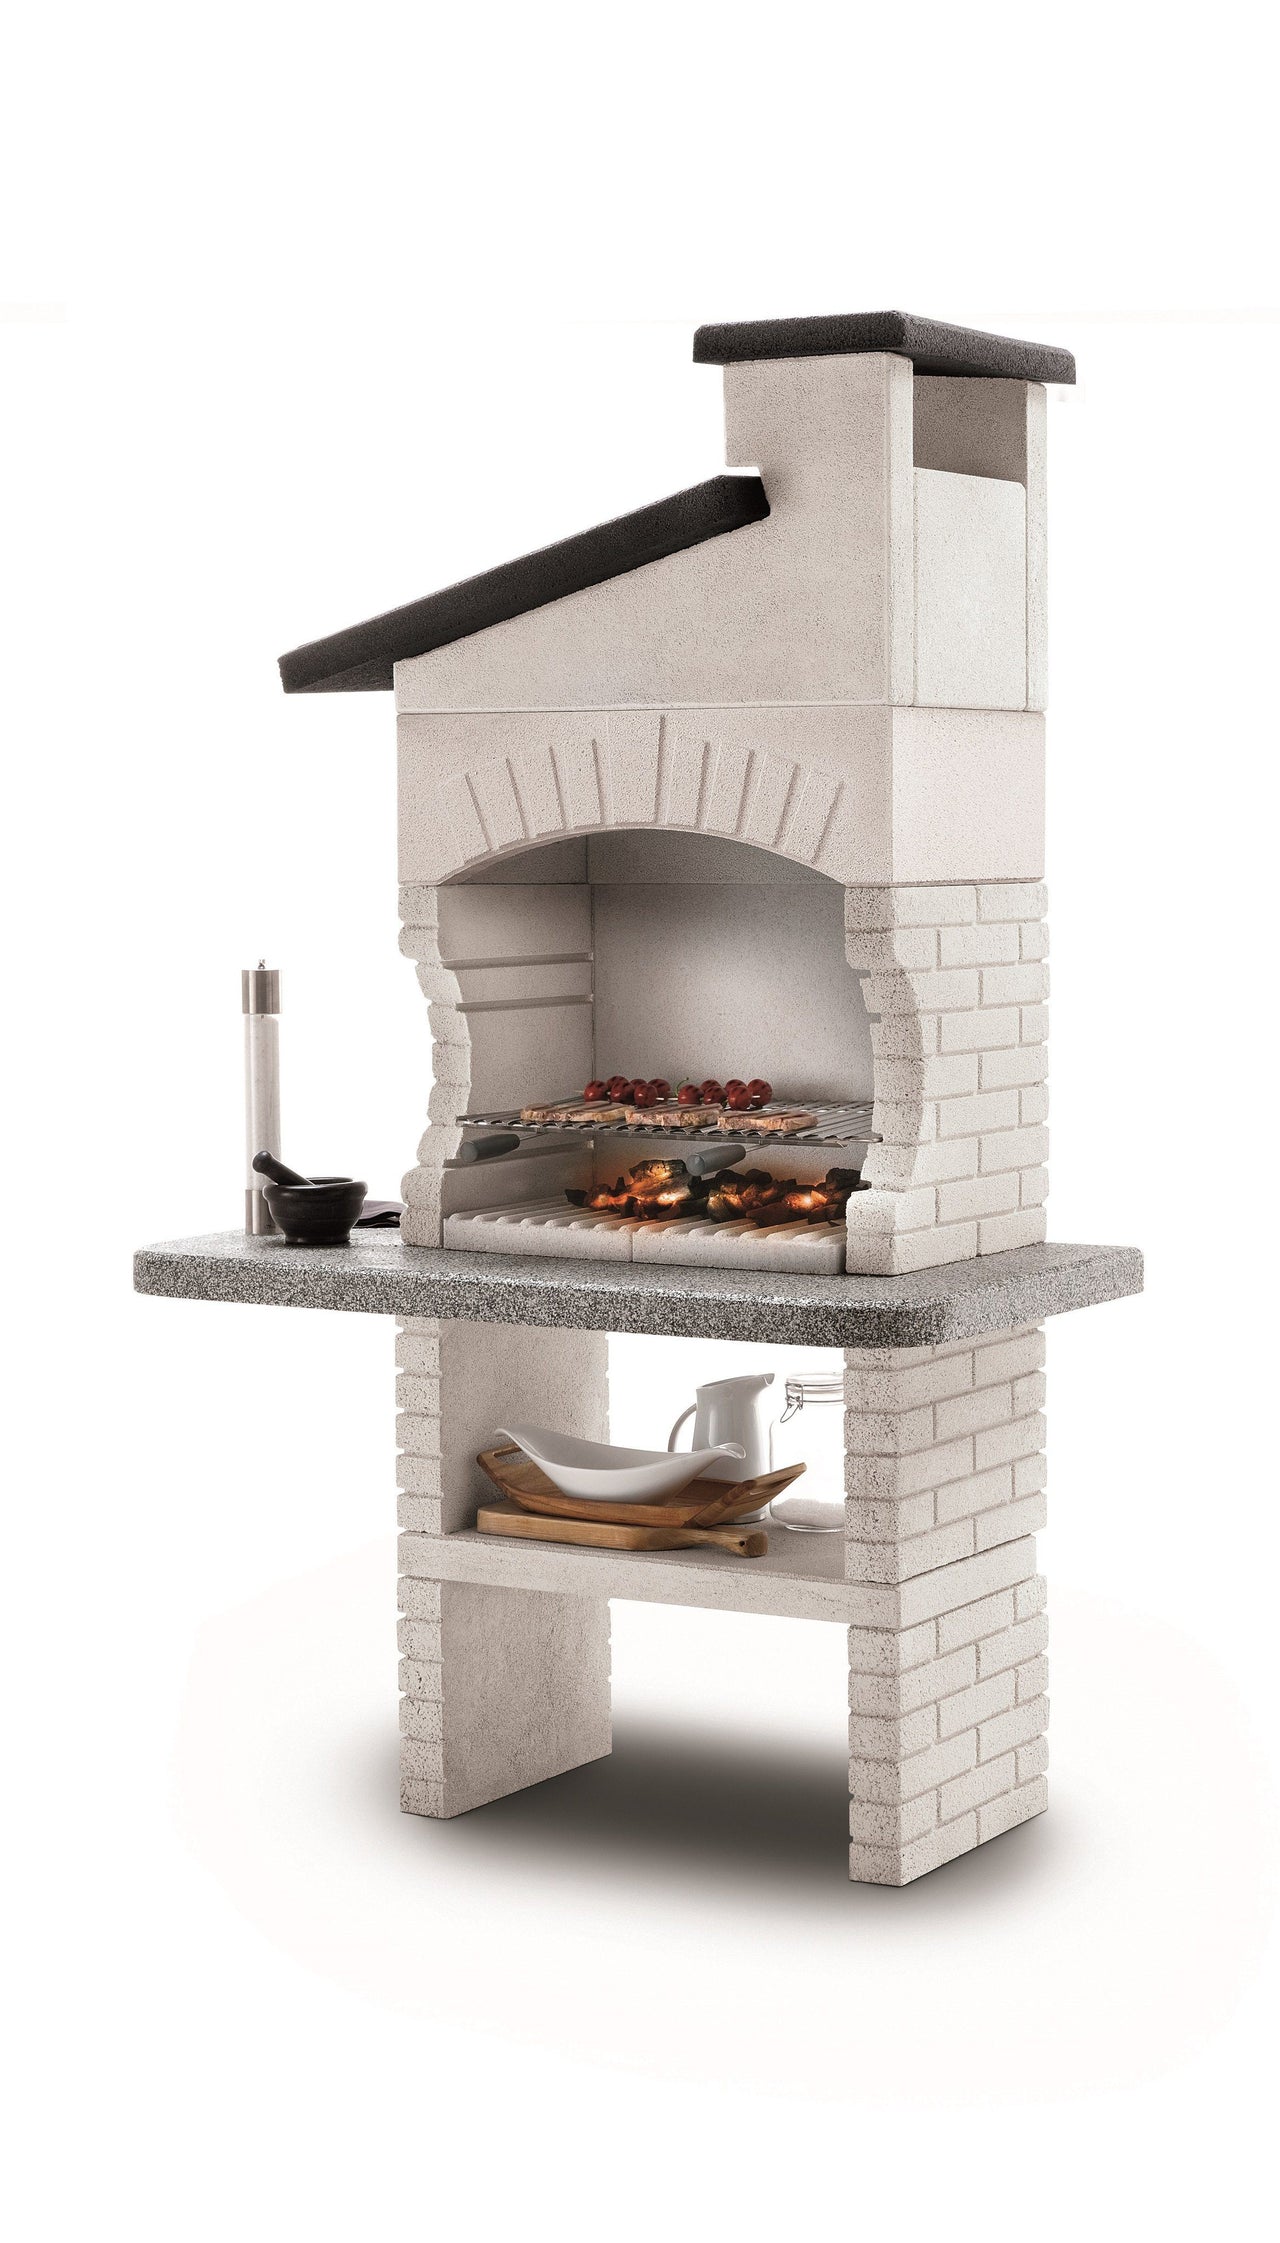 Palazzetti GUANACO 2 Barbecue Outdoor Cooking Grill By Paini Pizza Ovens Paini 